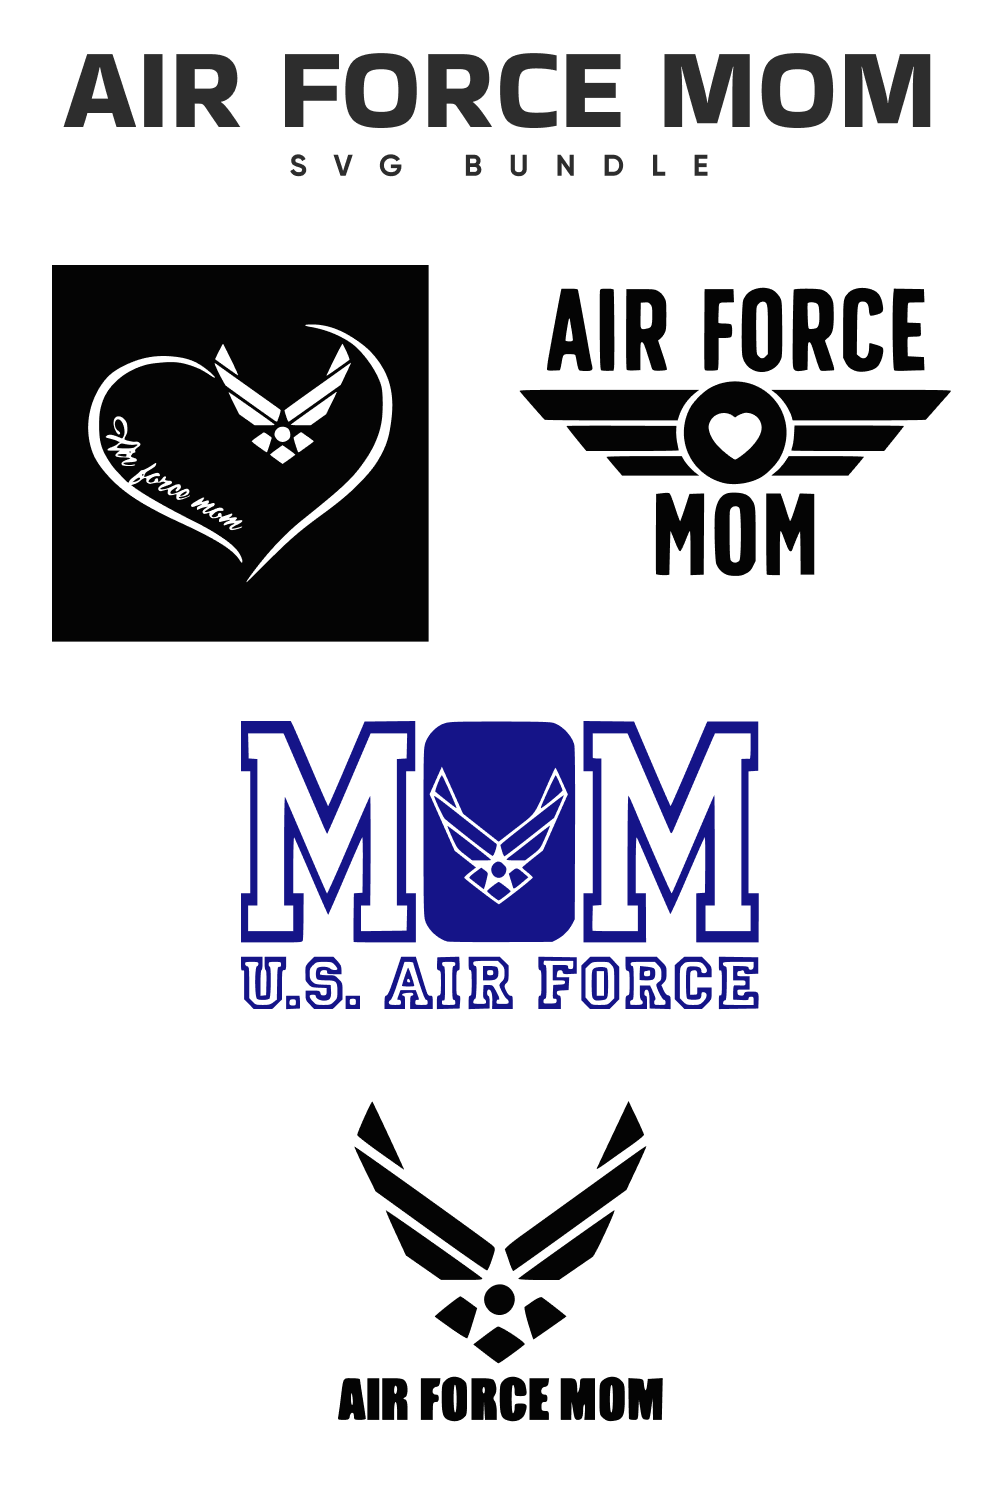 Four pictures of Air force mom SVG Bundle on the white and black backgrounds.